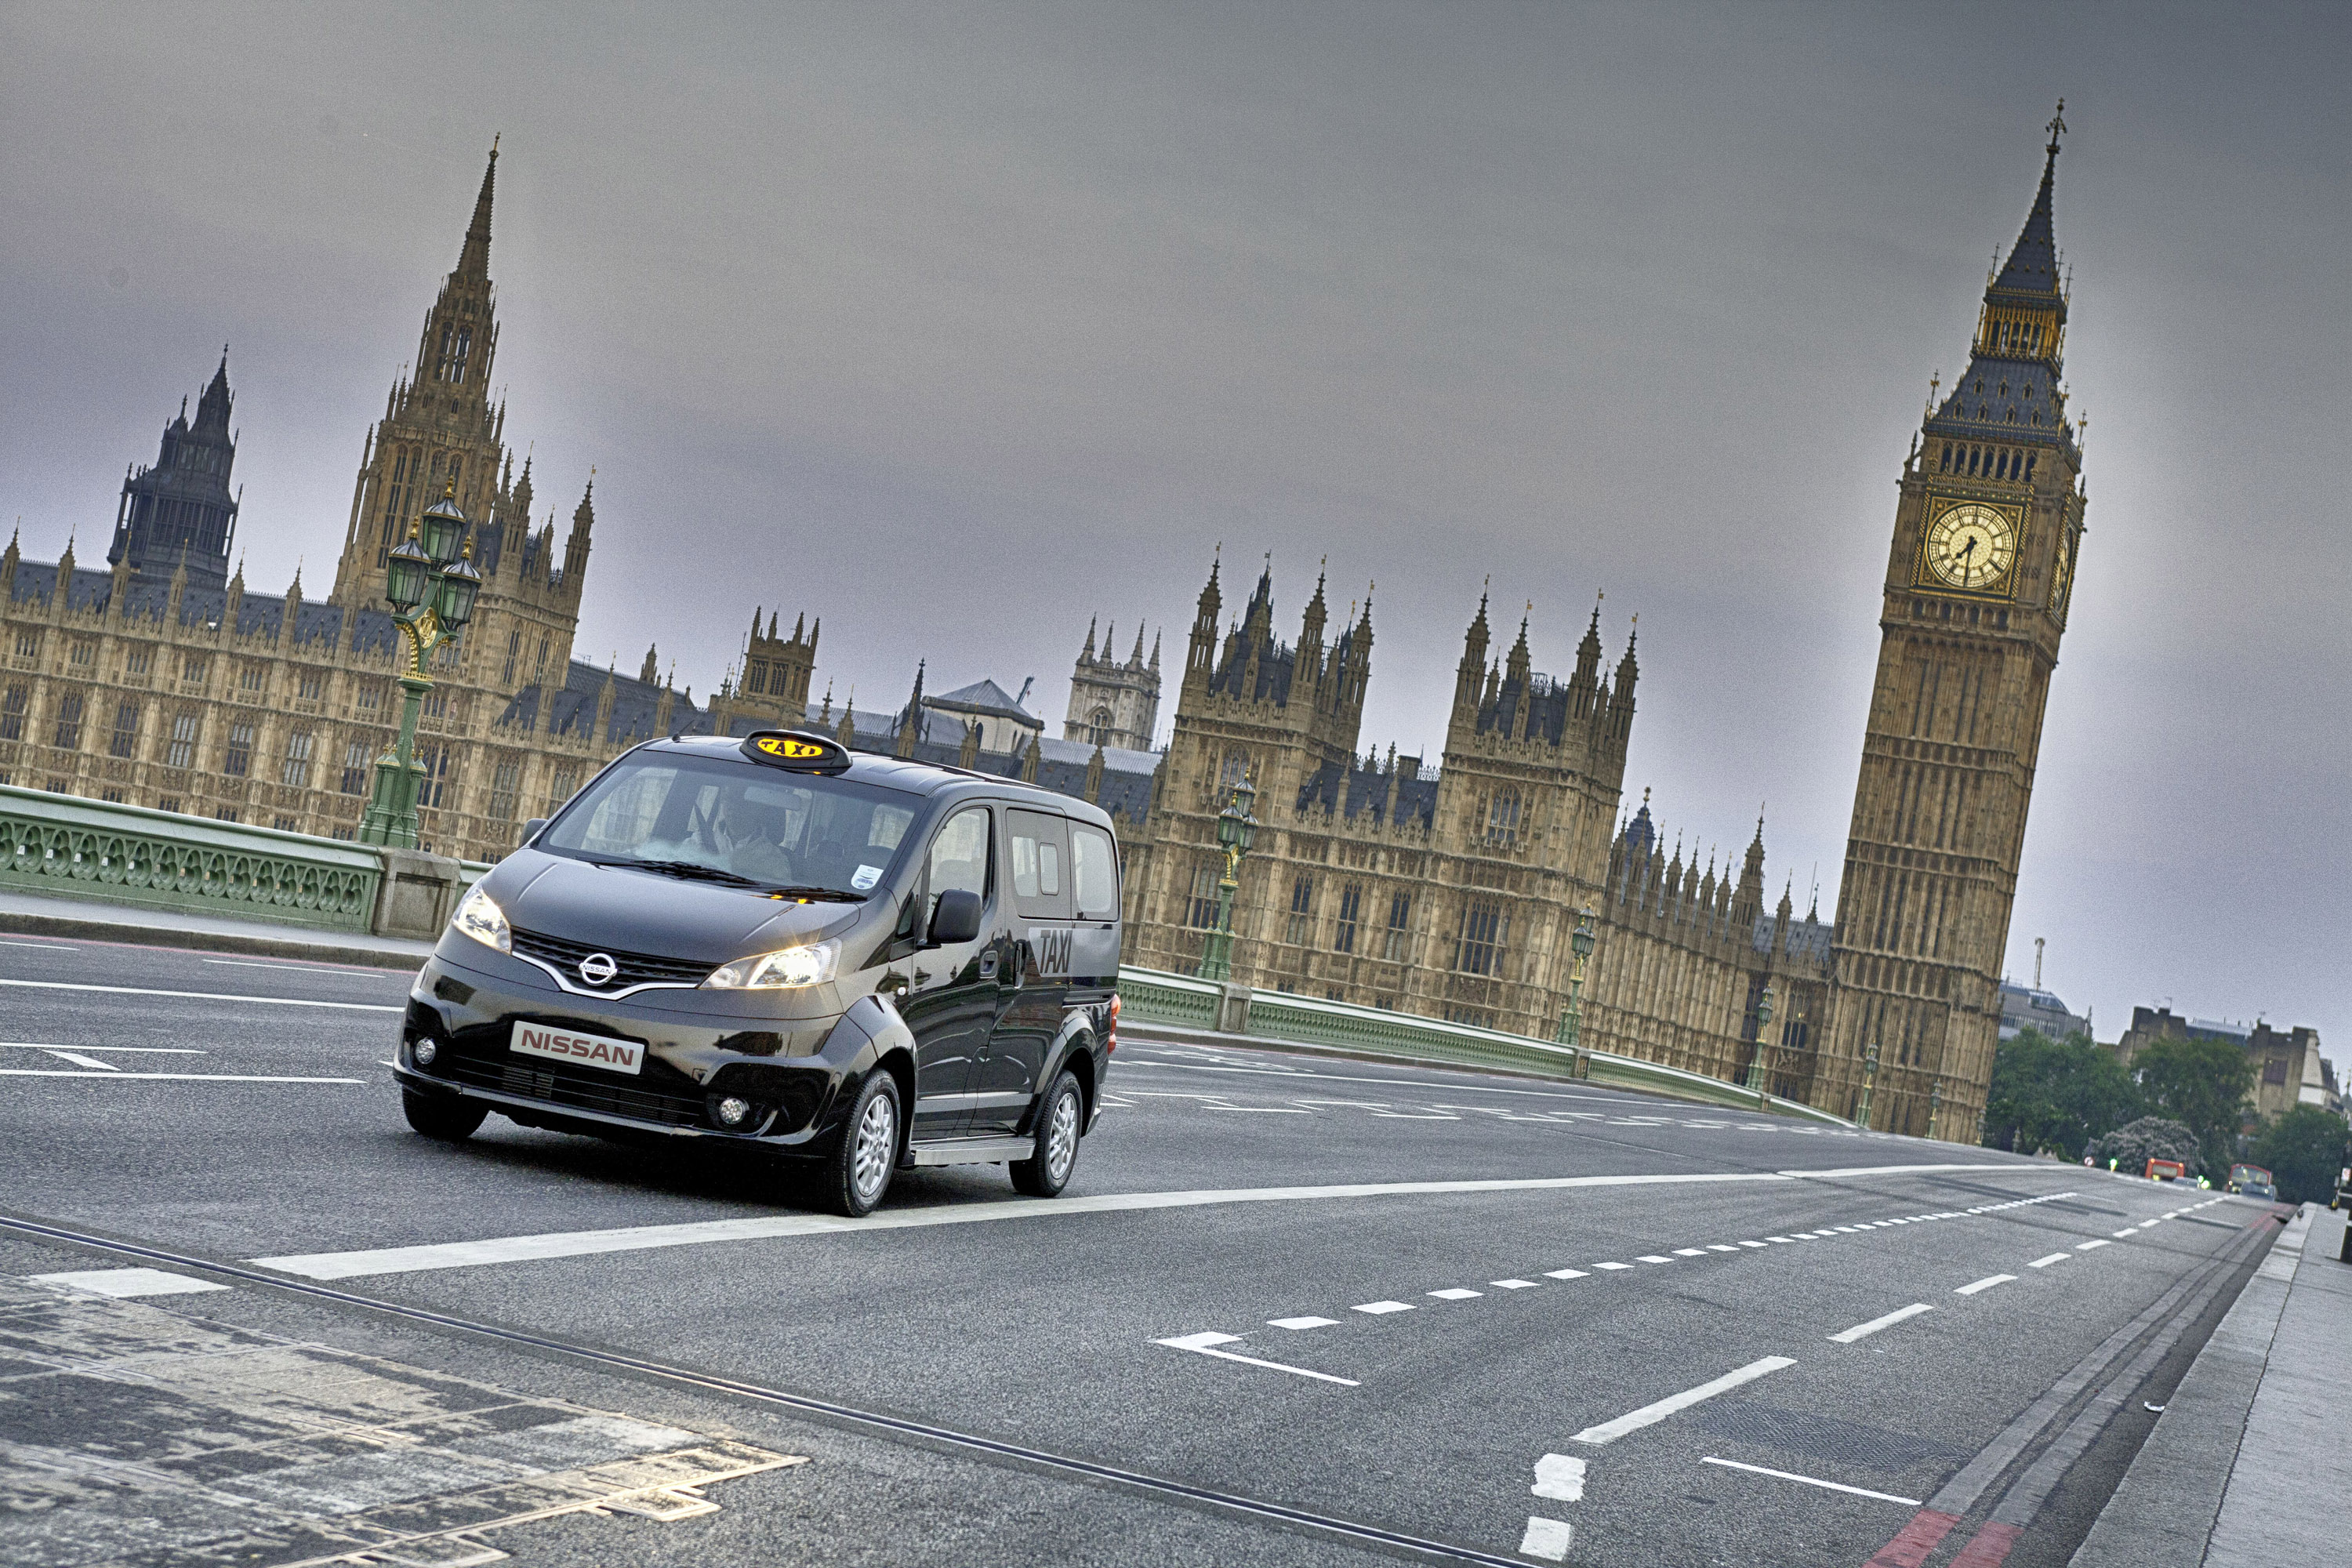 Nissan e-NV200 and NV200 London Taxi